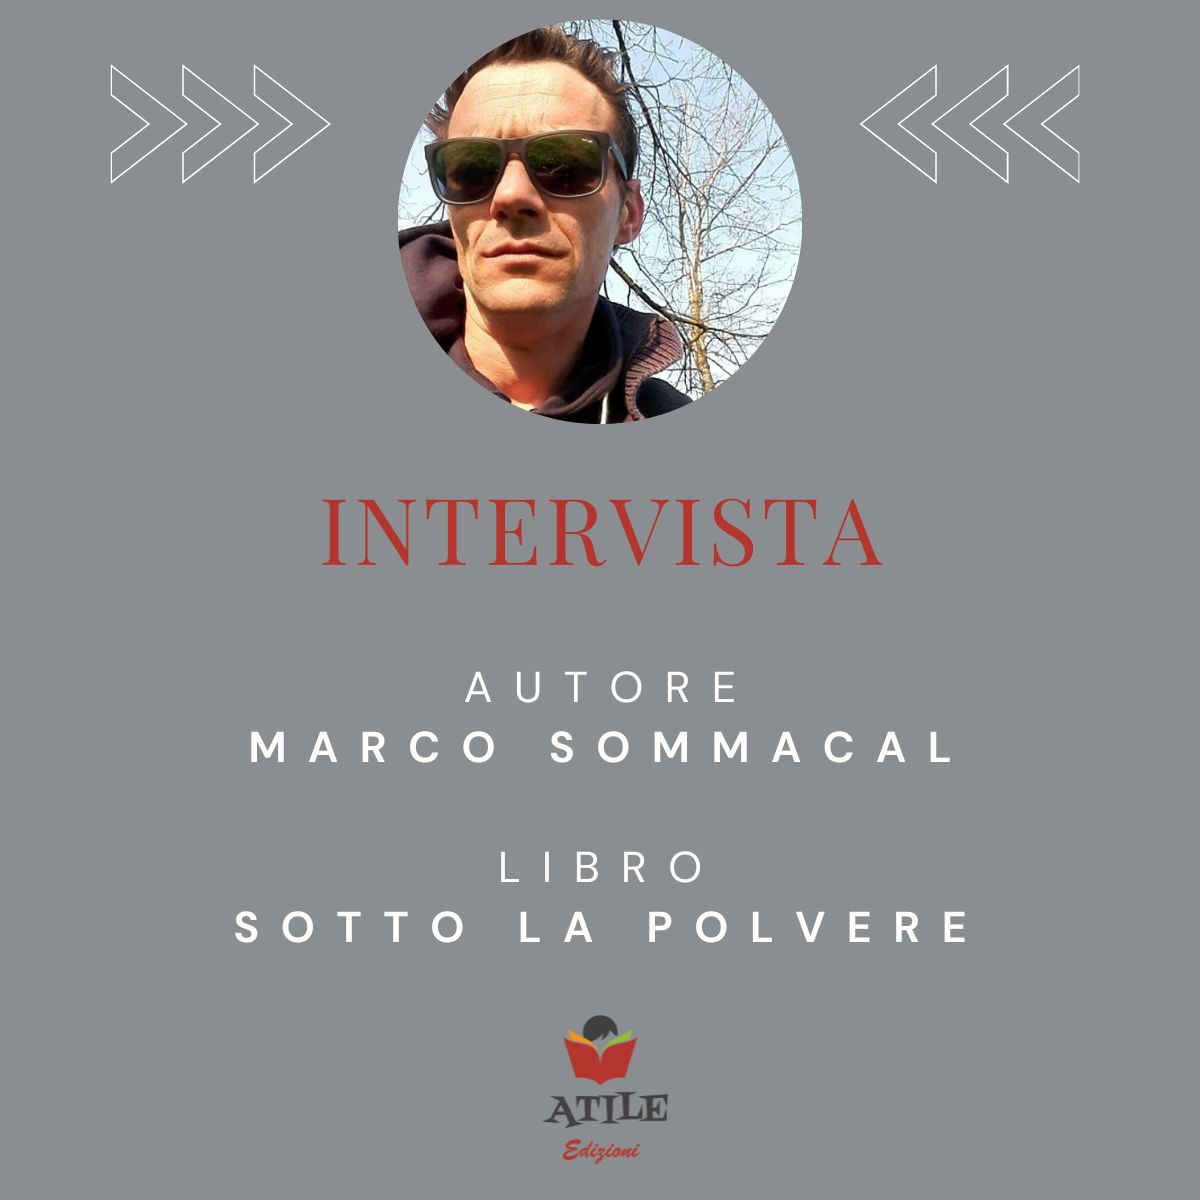 Intervista Marco Sommacal